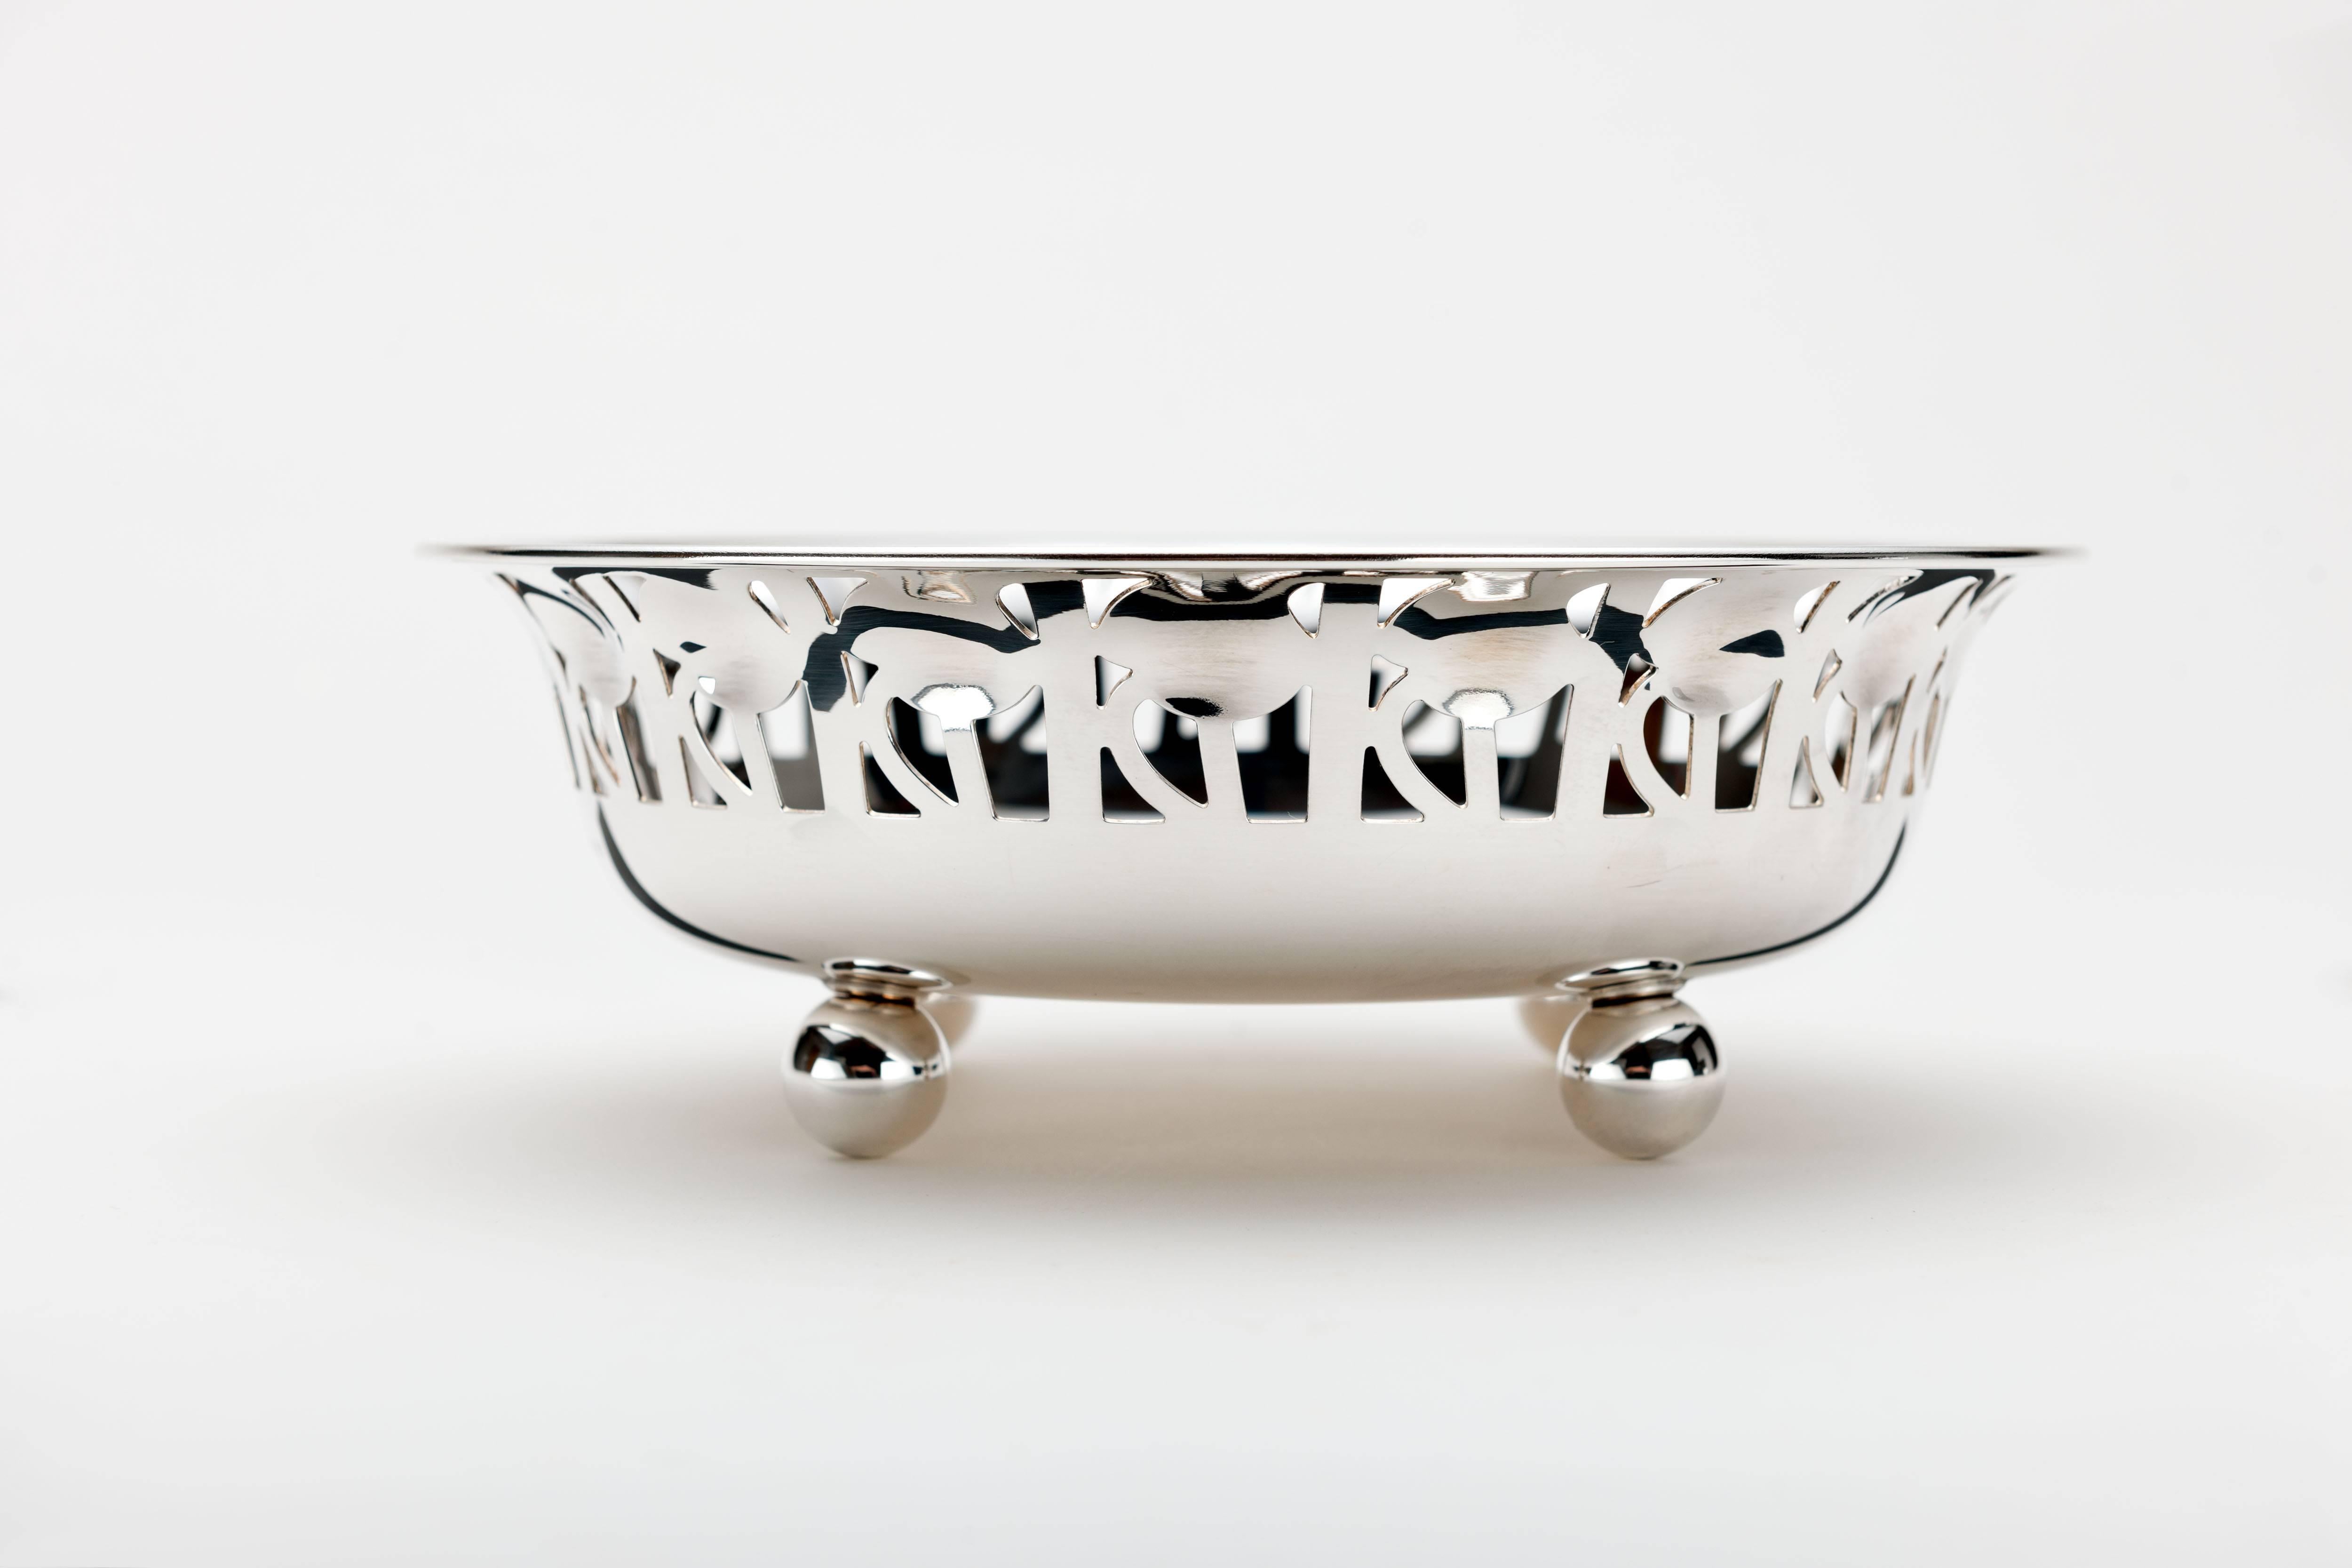 Vintage brass silver plated 'Rosenschale' rose bowl designed by Peter Arnell and Ted Pickford, made circa 1983 by Alessi. 
This rounded open bowl stands raised on four ball feet with a pierced rose leaf design repeated around the rim with impressed